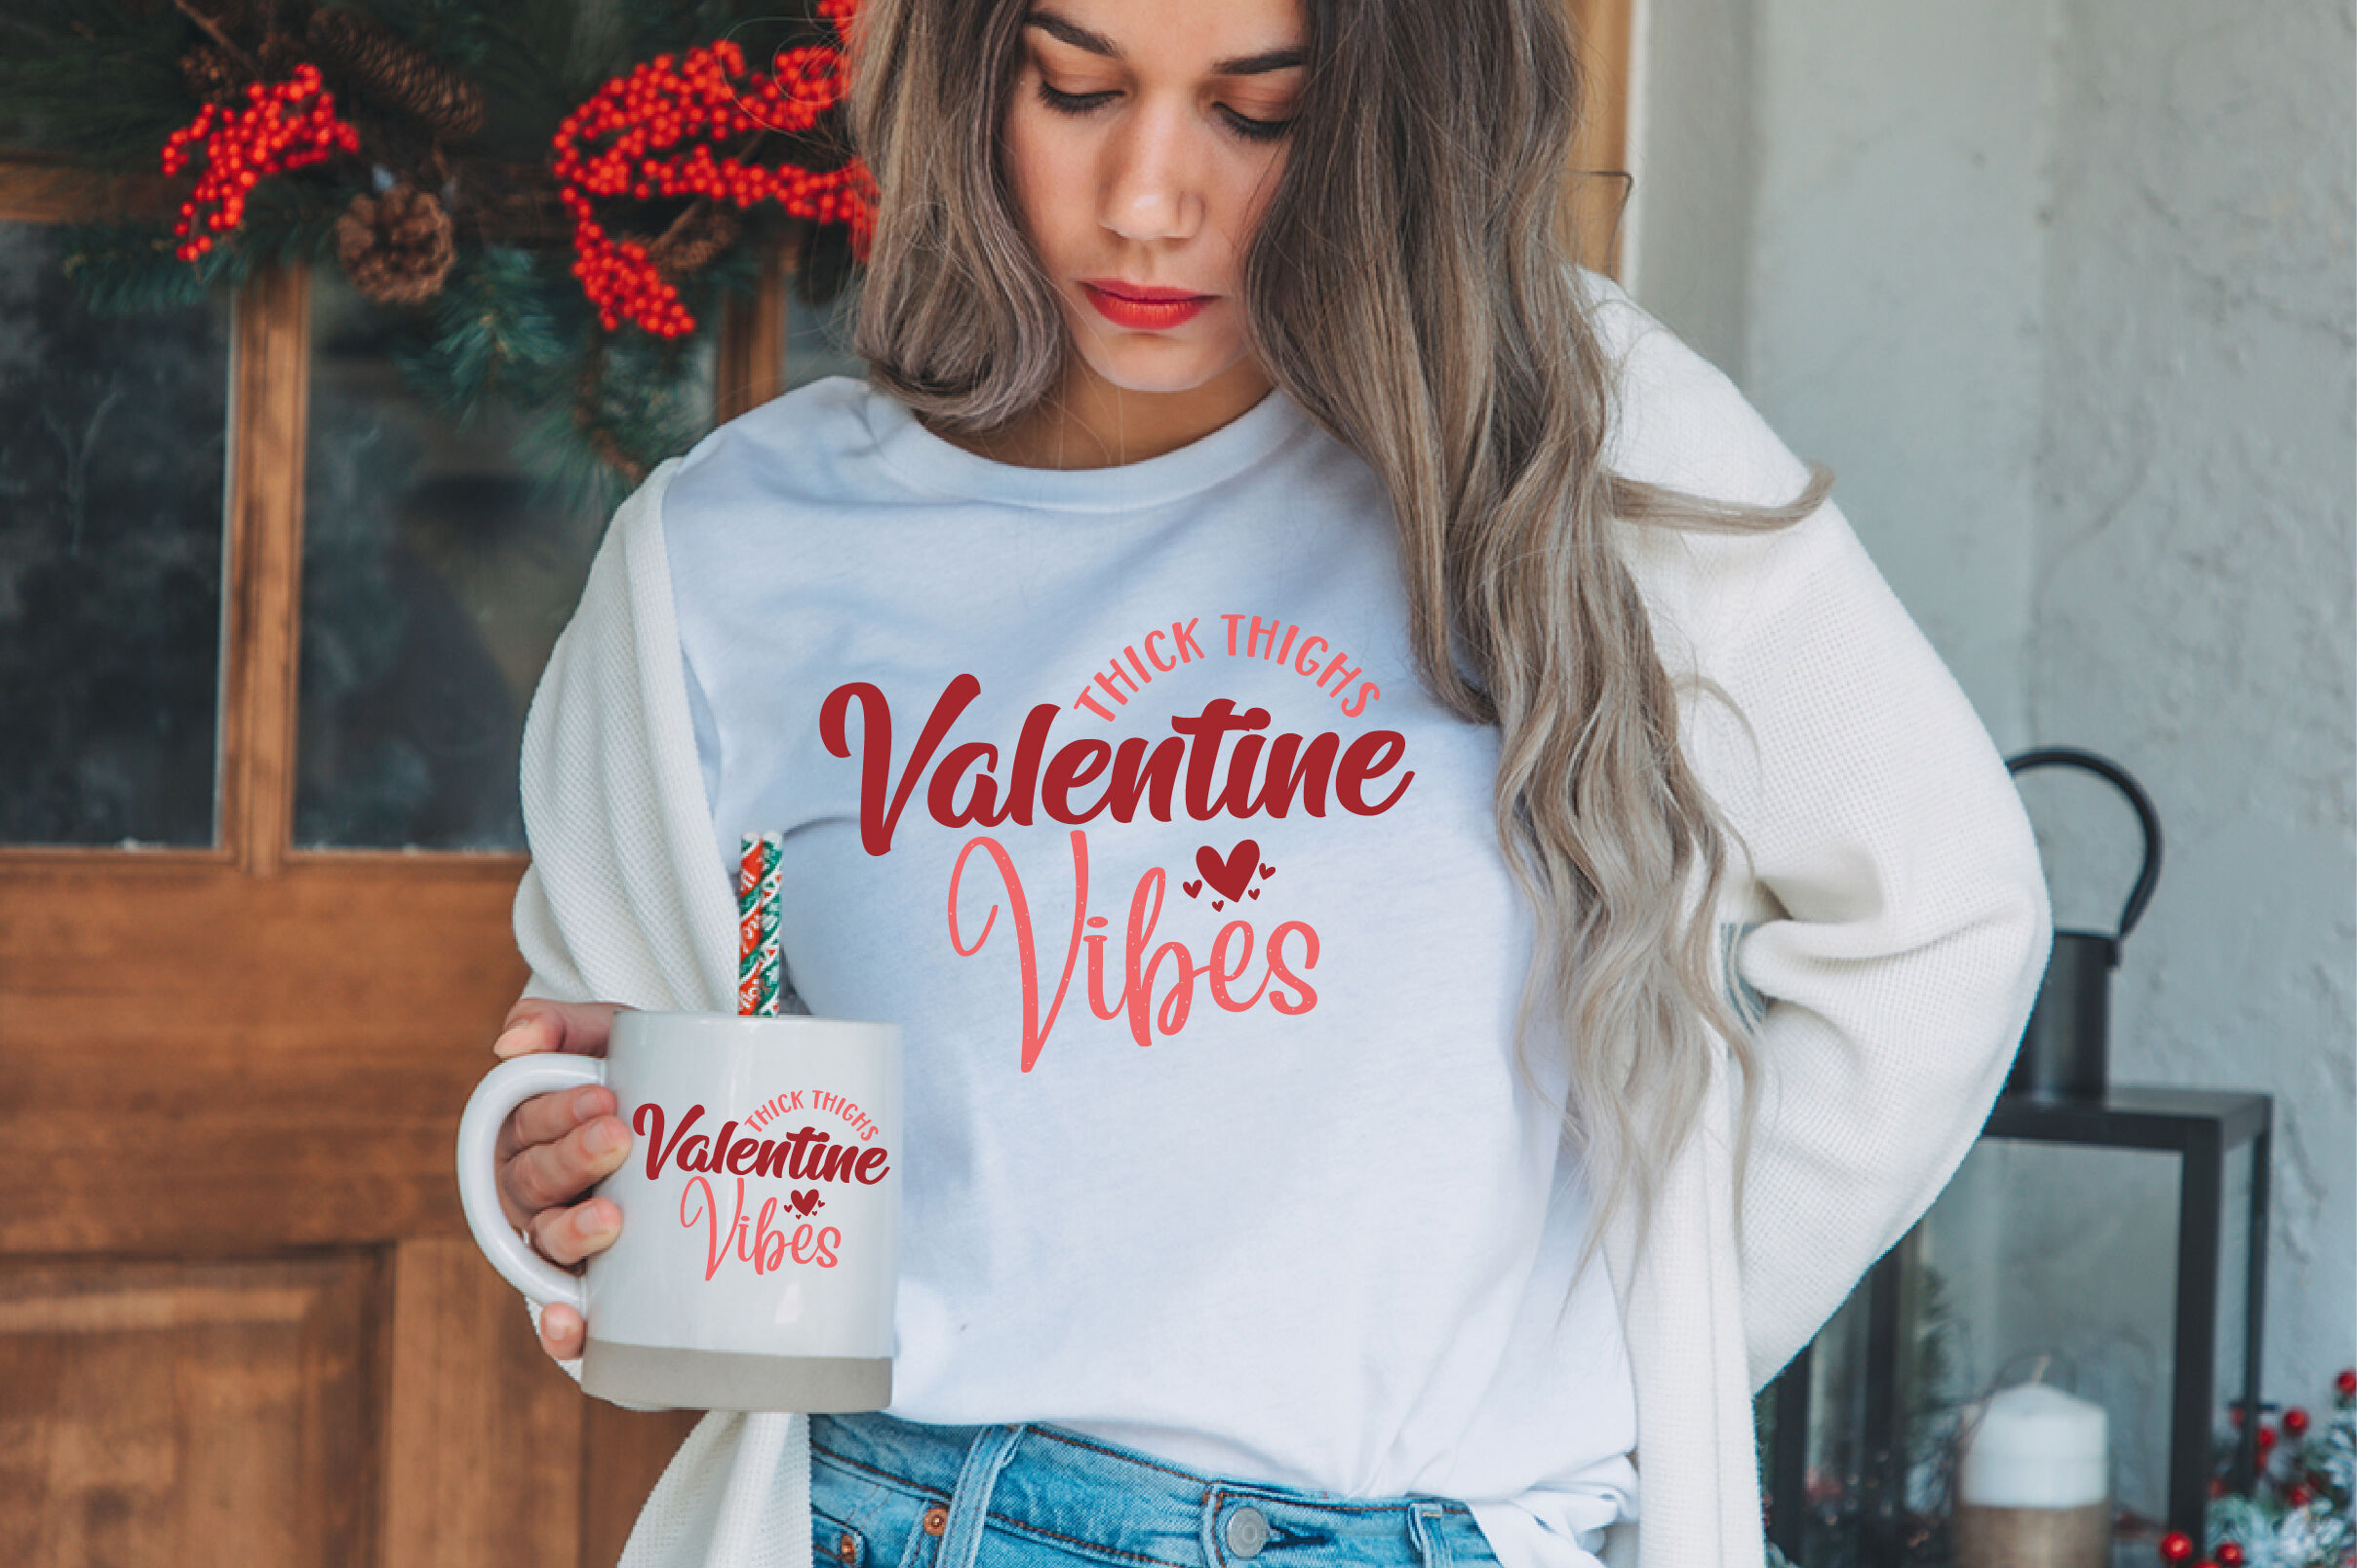 Thick Thighs Valentine Vibes By orpitabd | TheHungryJPEG